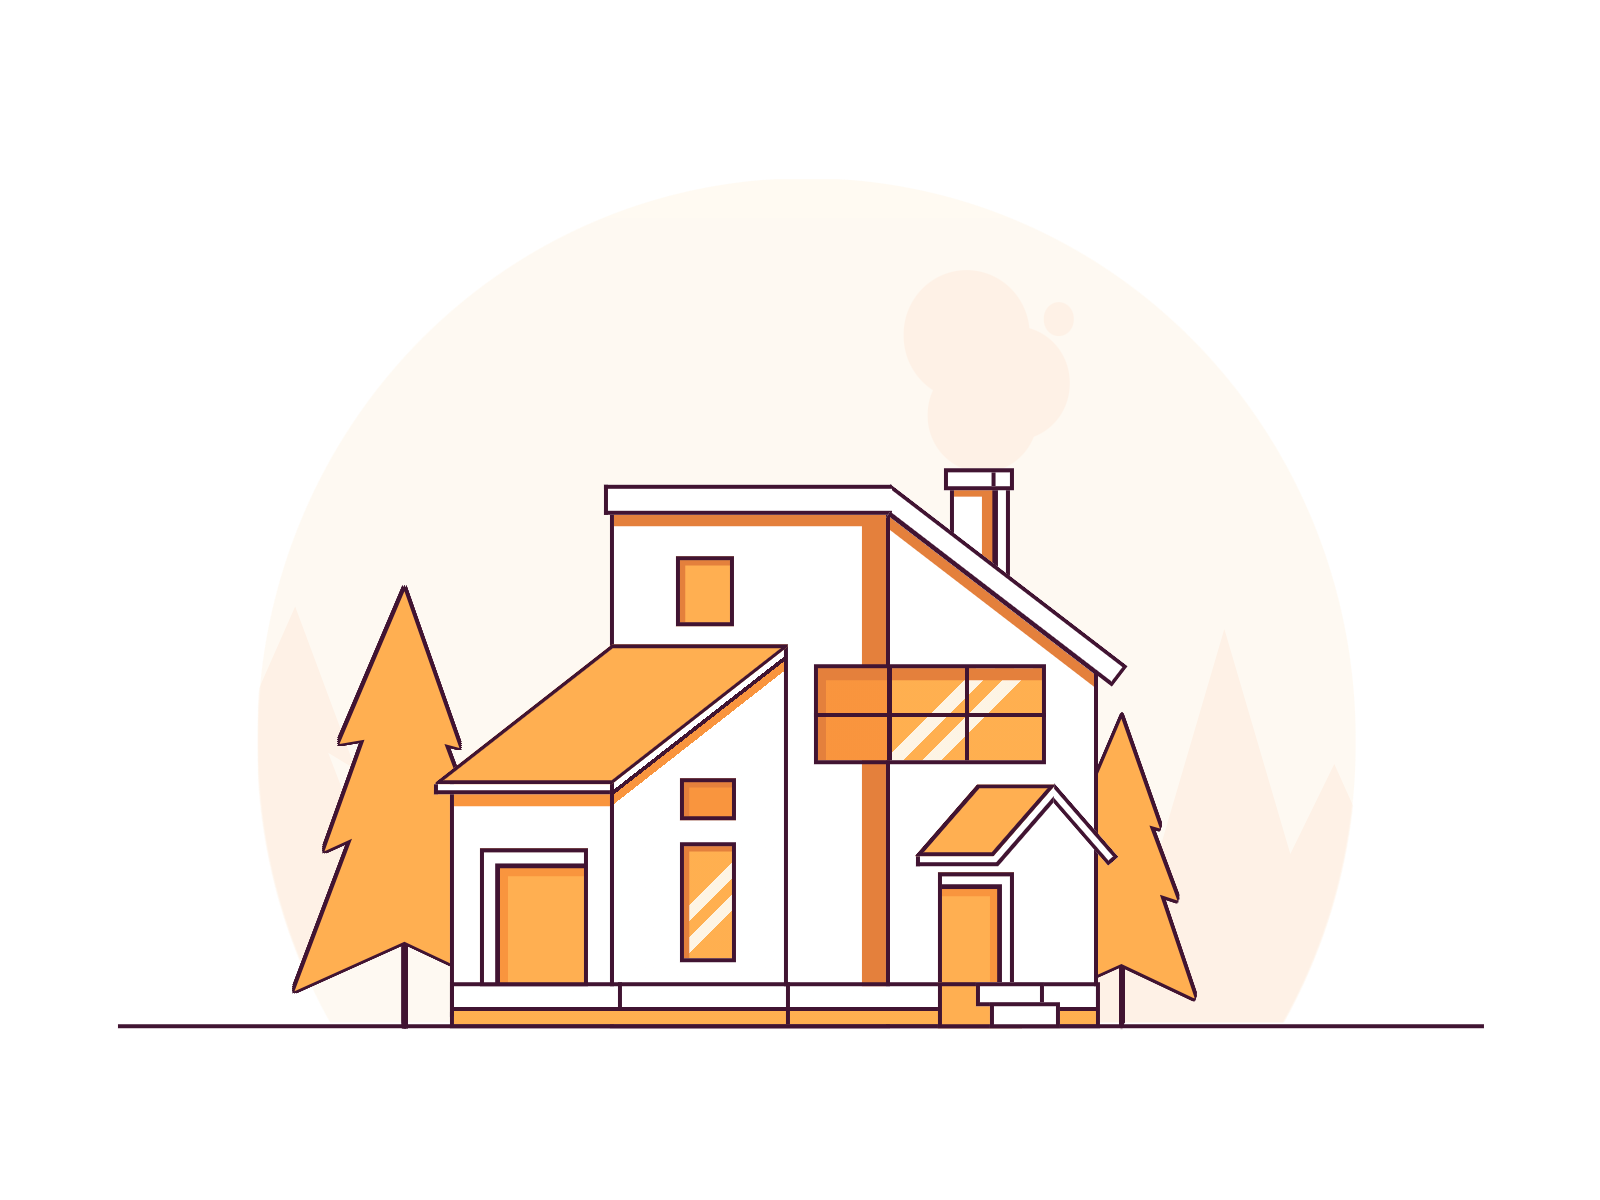 Minimalistic drawing of a house using lines